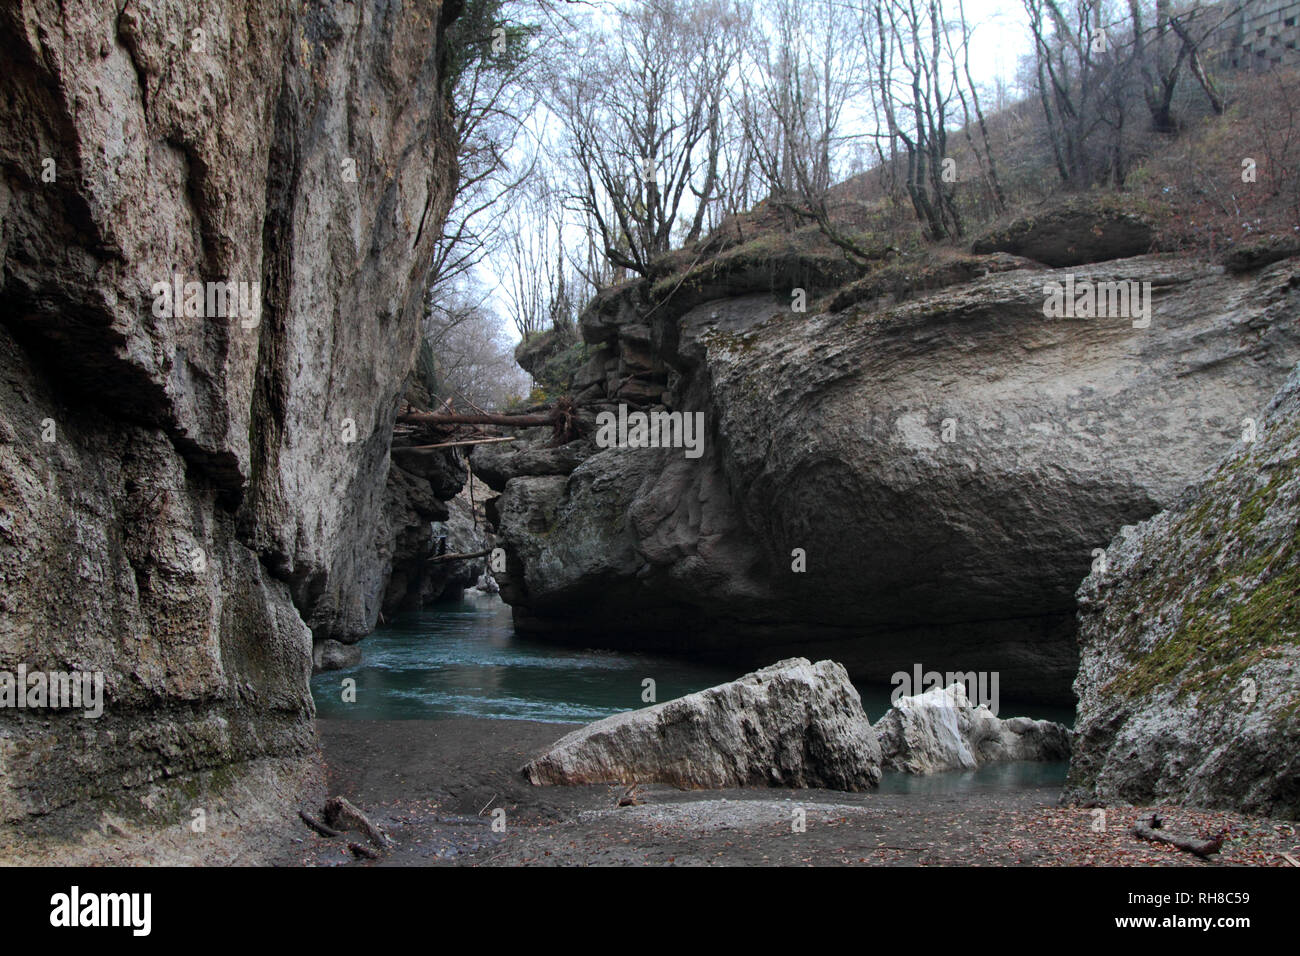 Steep cliffs hang over the water in the Khadzhokhskaya gorge. Stock Photo